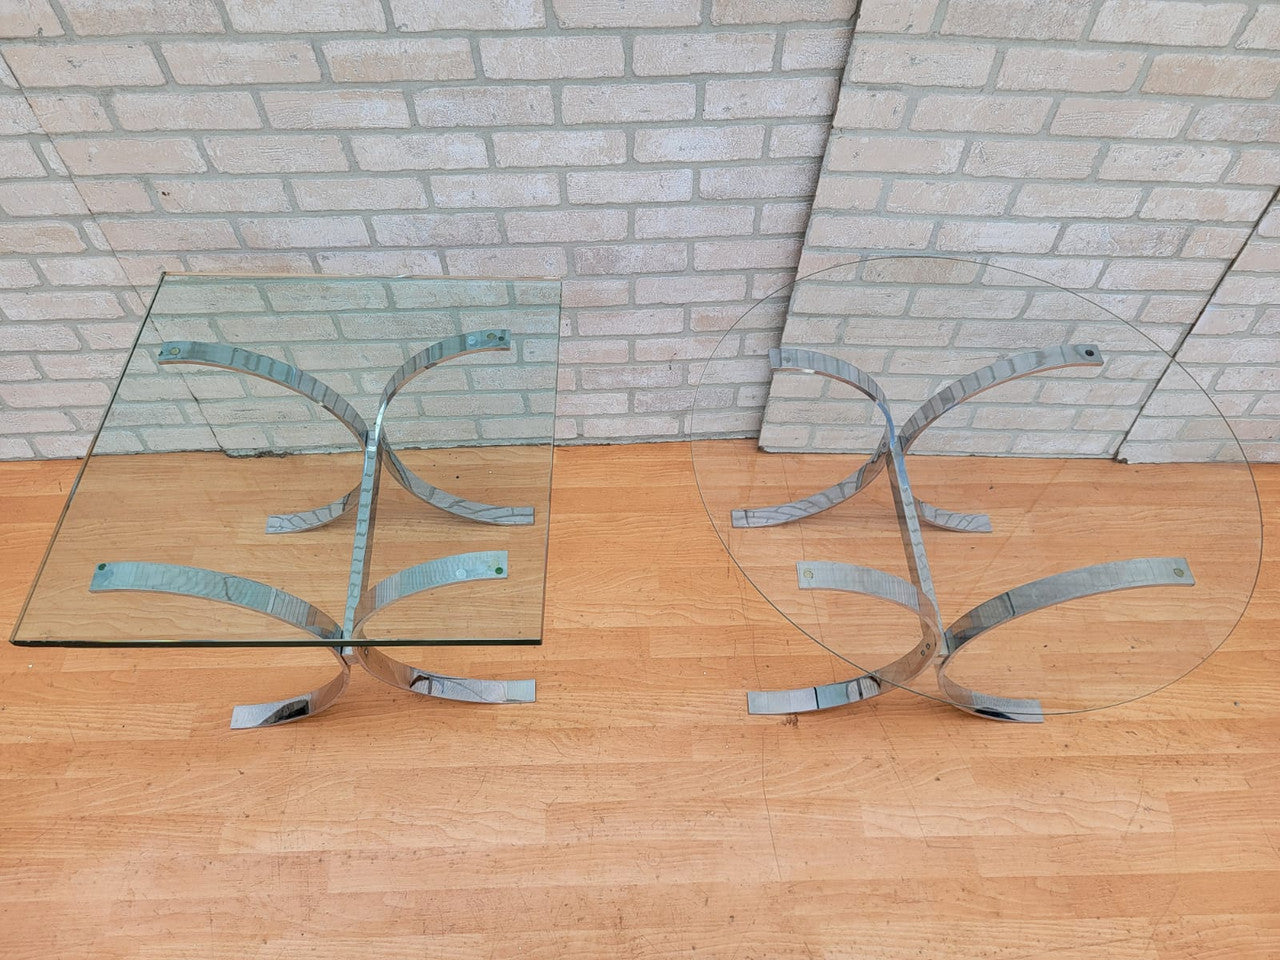 Mid Century Modern Glass and Chrome Coffee and Two Side Tables - 3 Piece Set